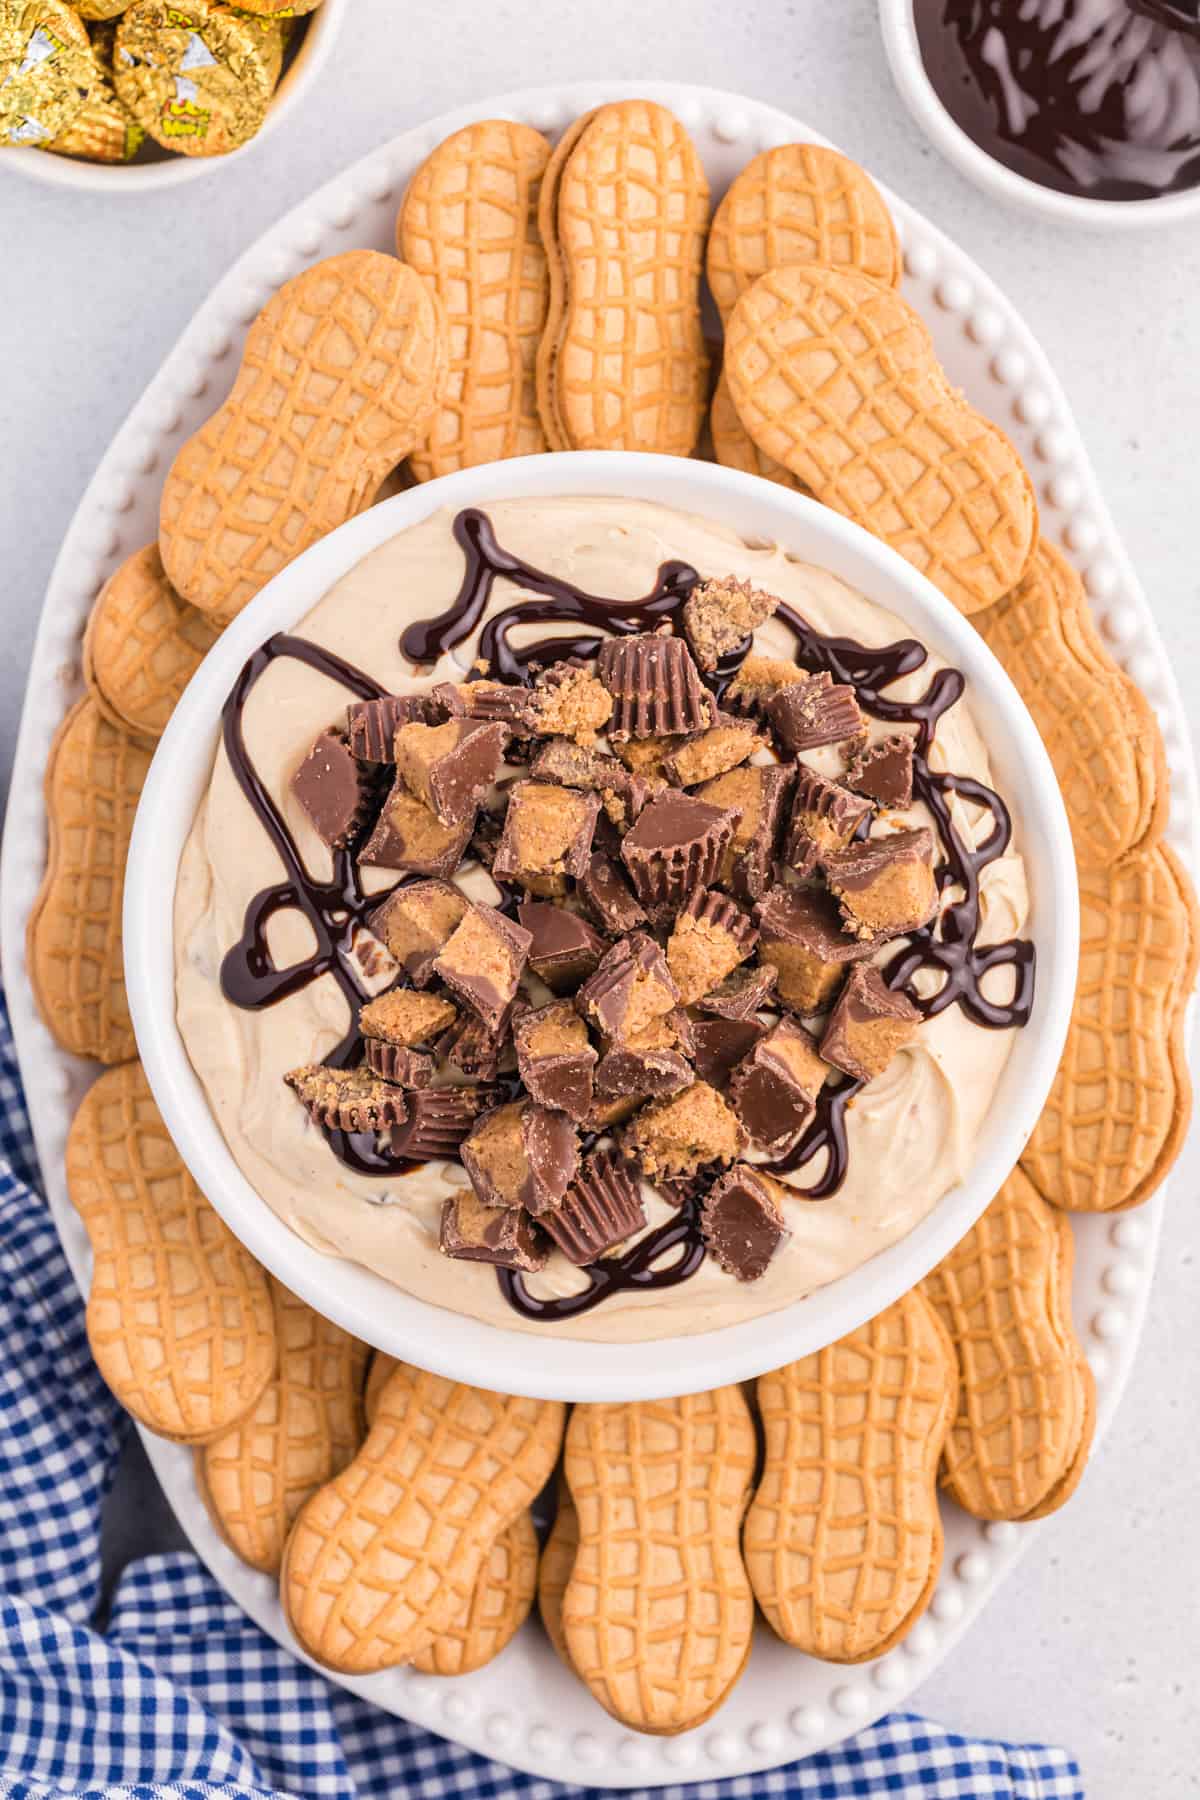 Reese's Cheesecake Dip served with peanut butter cookies for dipping.